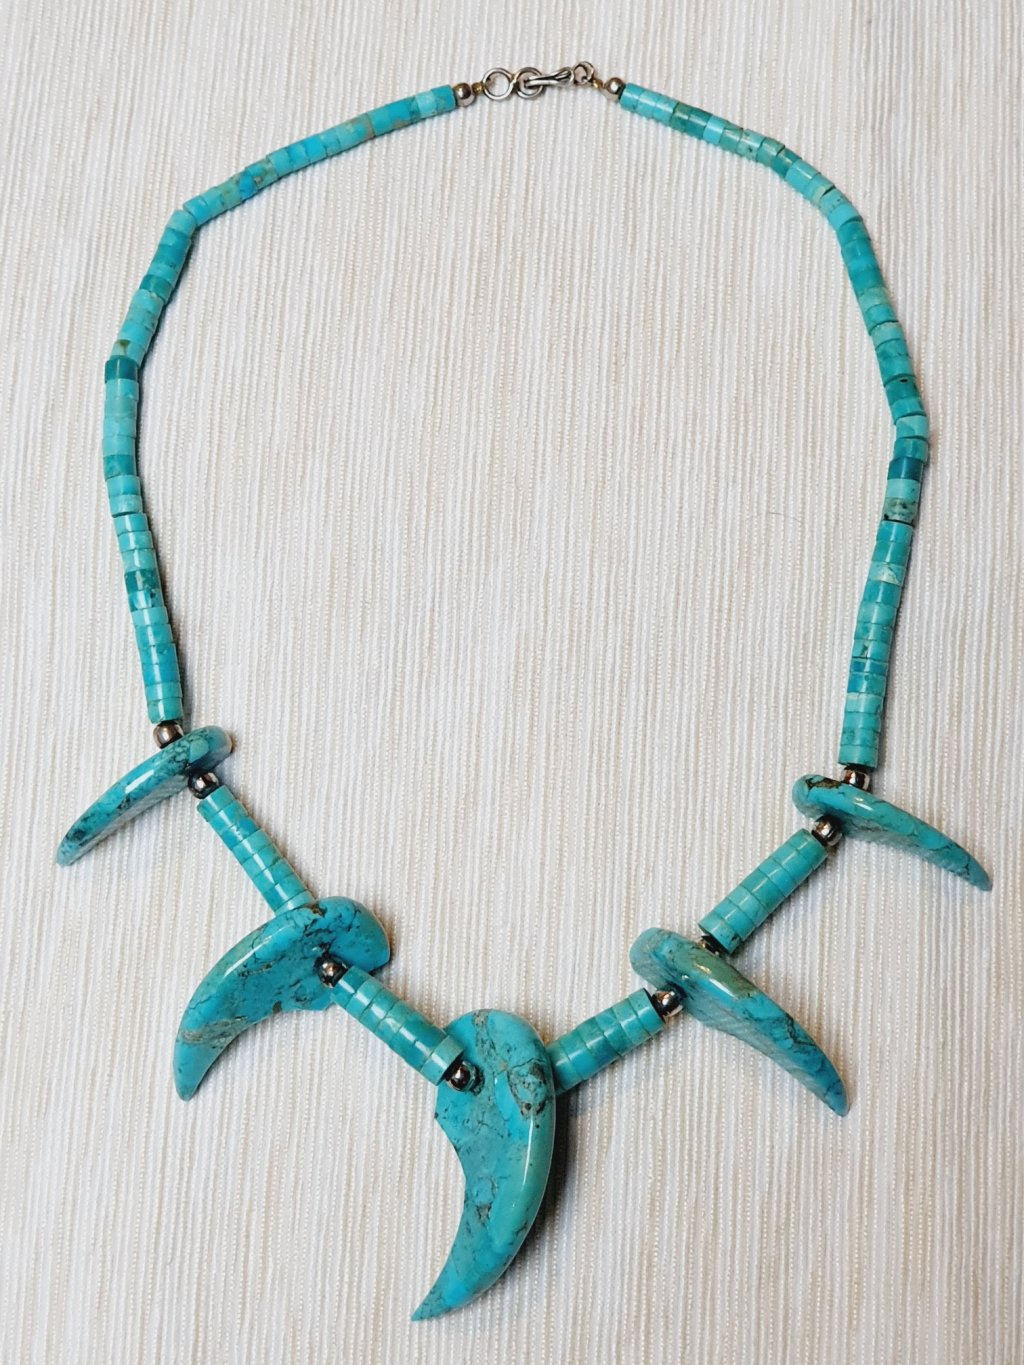 image-11582492-Collier_turquoise_griffe_ours-16790.w640.jpg